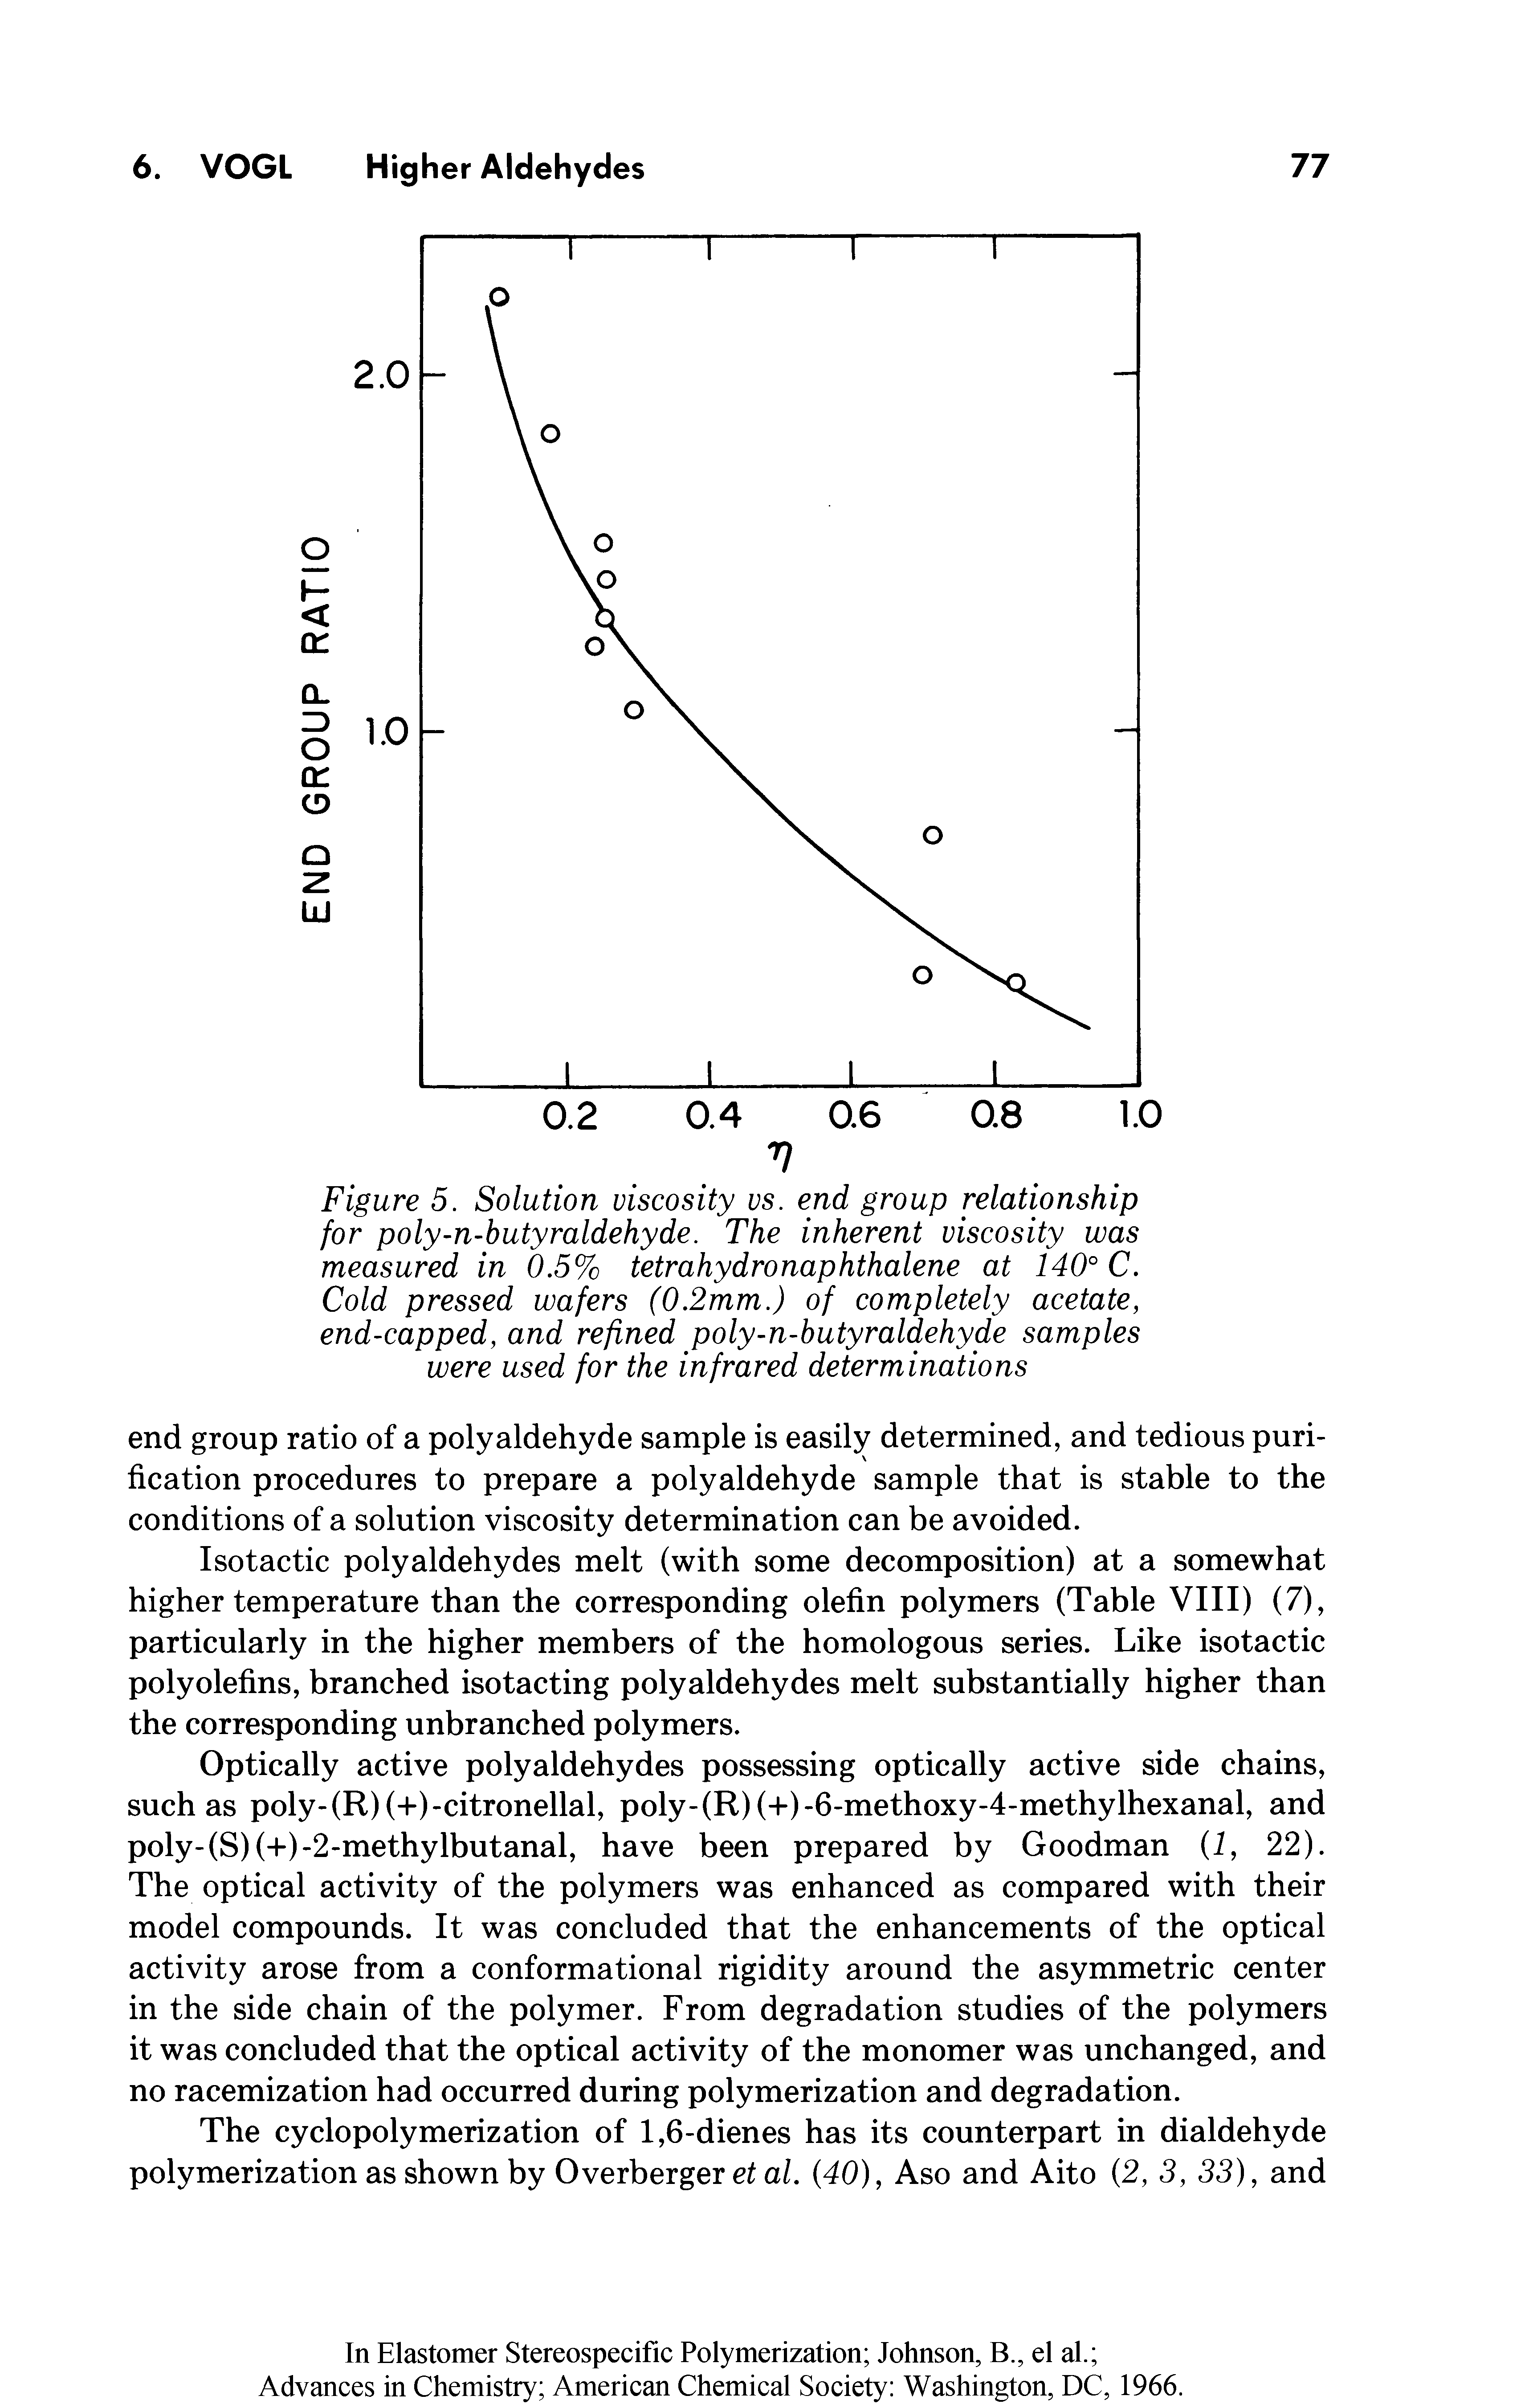 Figure 5. Solution viscosity vs. end group relationship for poly-n-butyraldehyde. The inherent viscosity was measured in 0.5% tetrahydronaphthalene at 140° C.